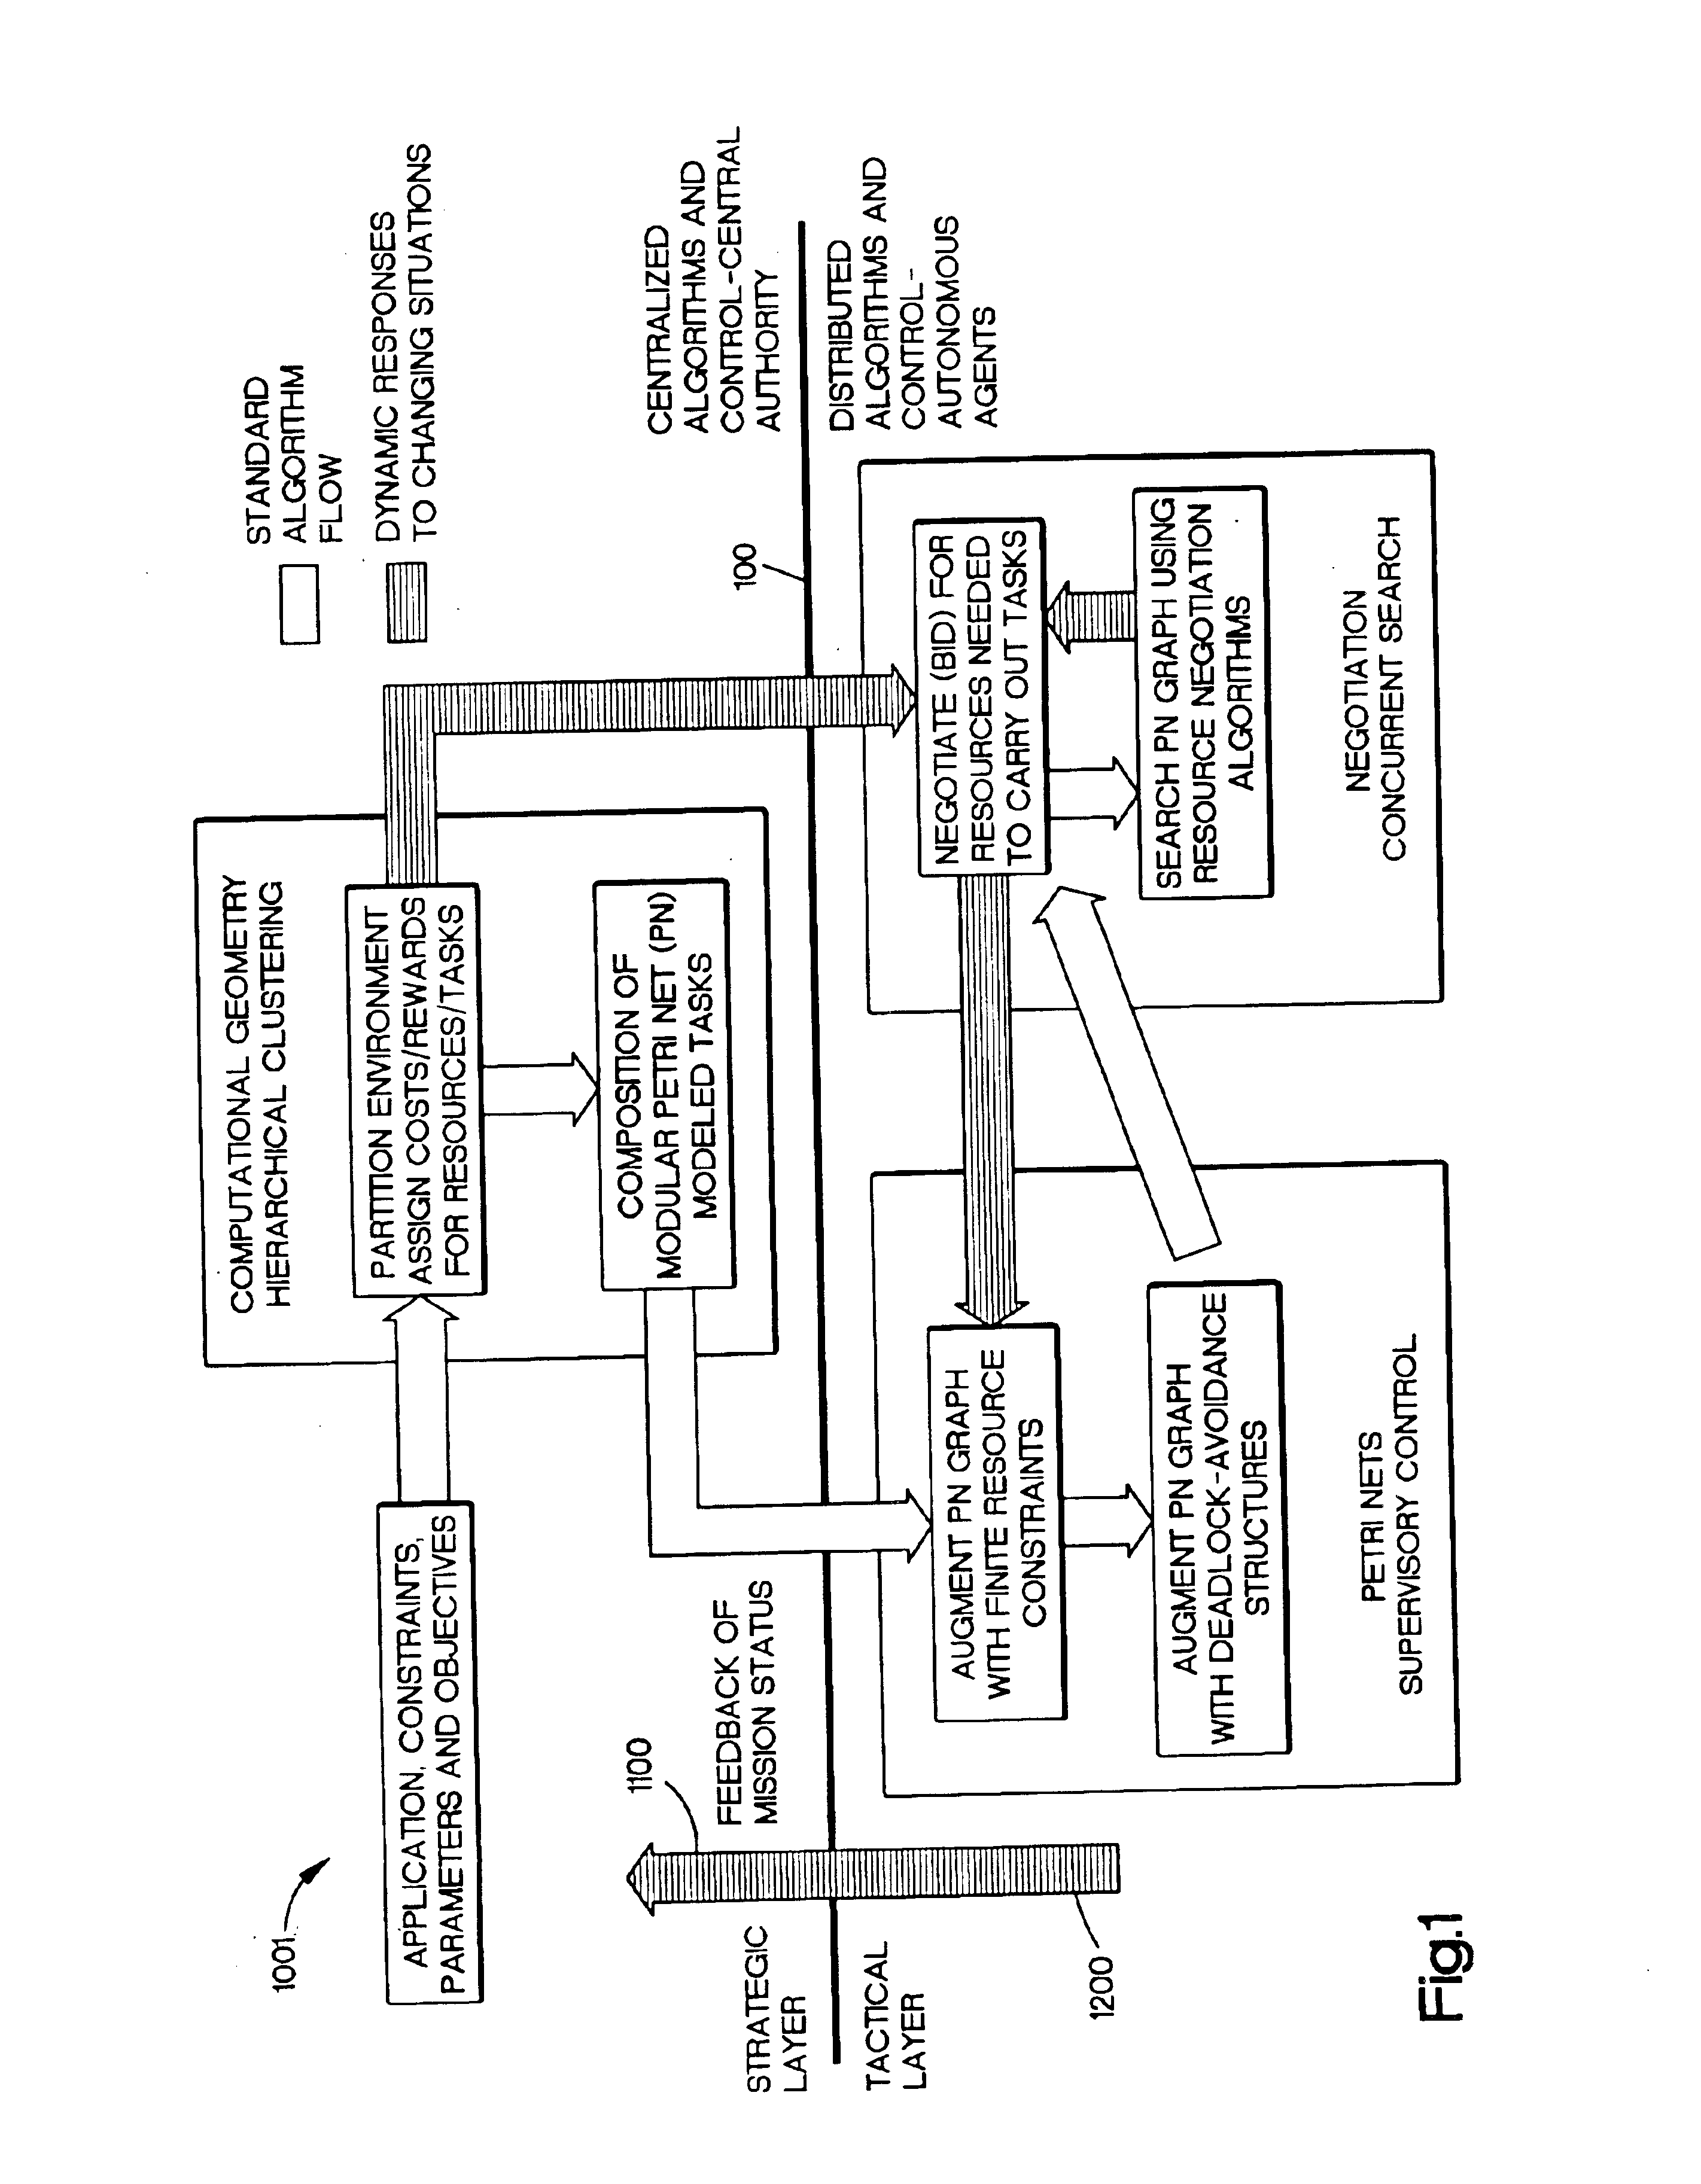 Apparatus and method for resource negotiations among autonomous agents